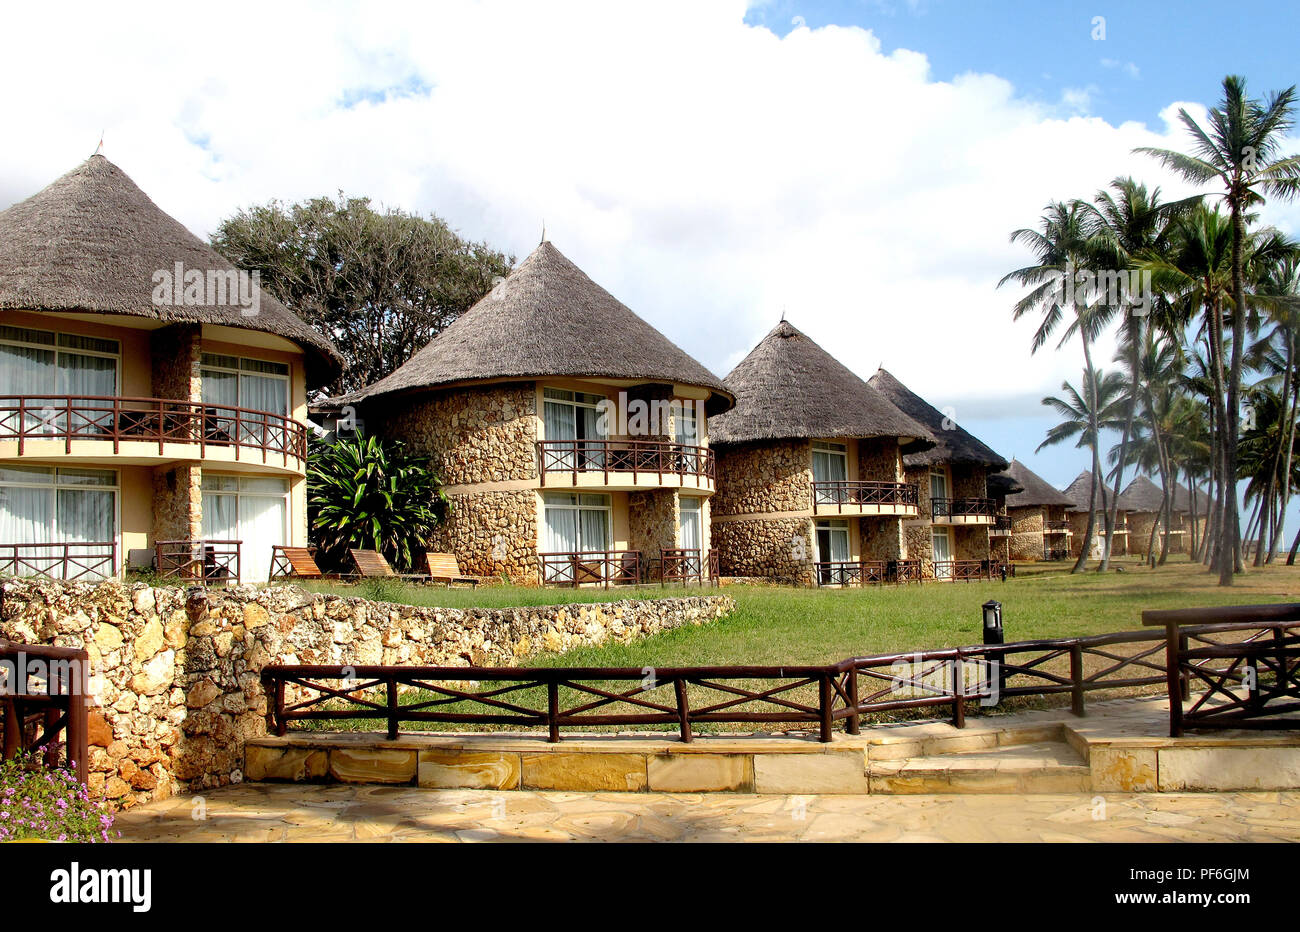 Thatched roof bungalows on the beach of the Crown Plaza Hotel in Dar es Salaam, Tanzania, Africa Stock Photo